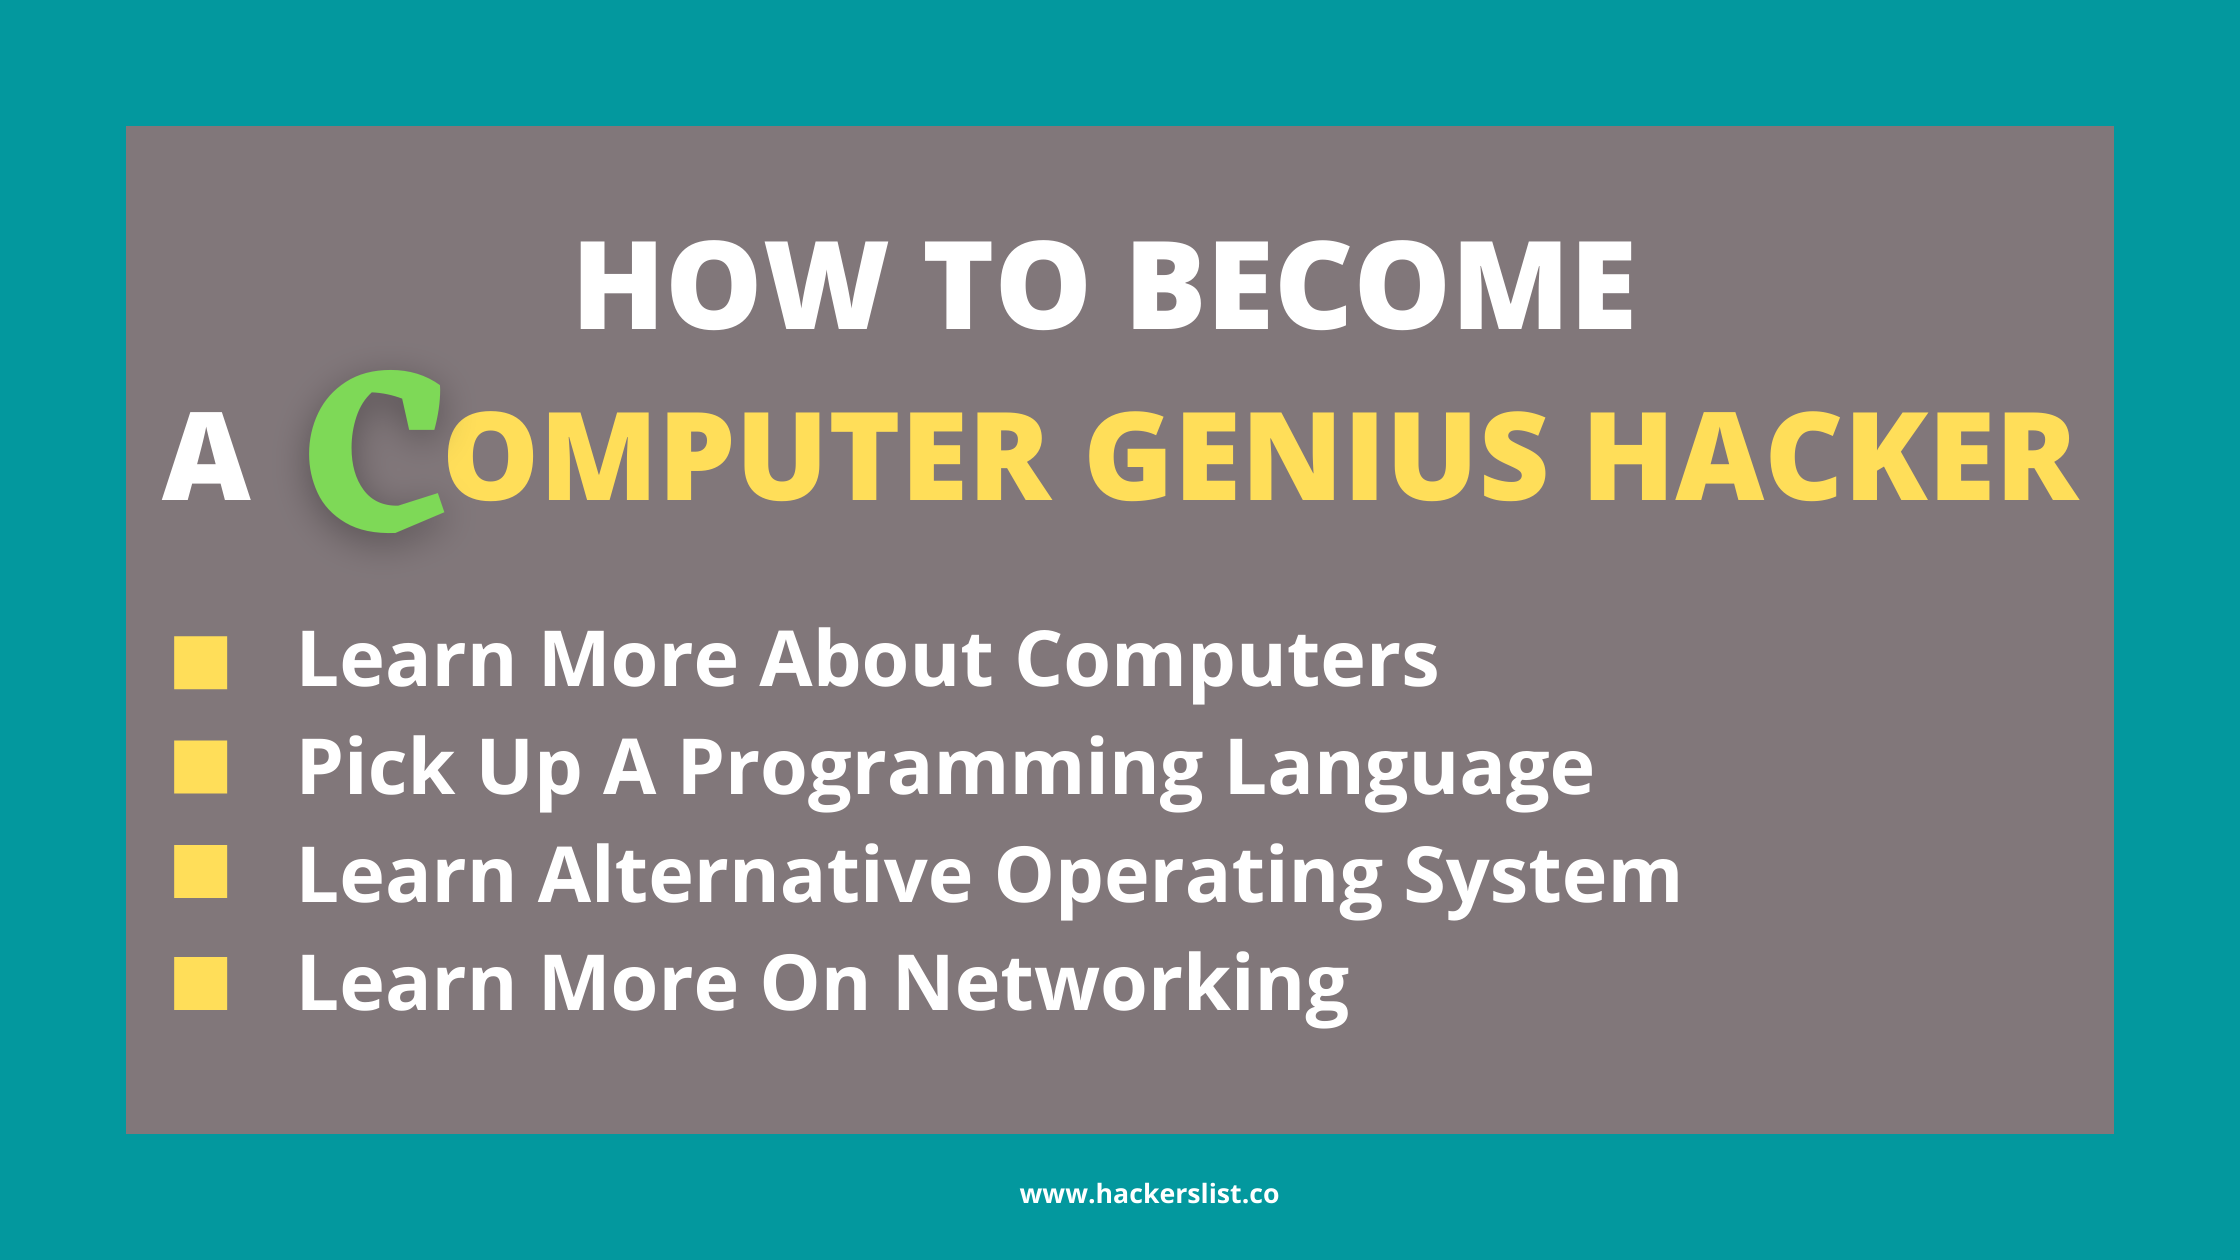 How to Become a Computer Genius Hacker